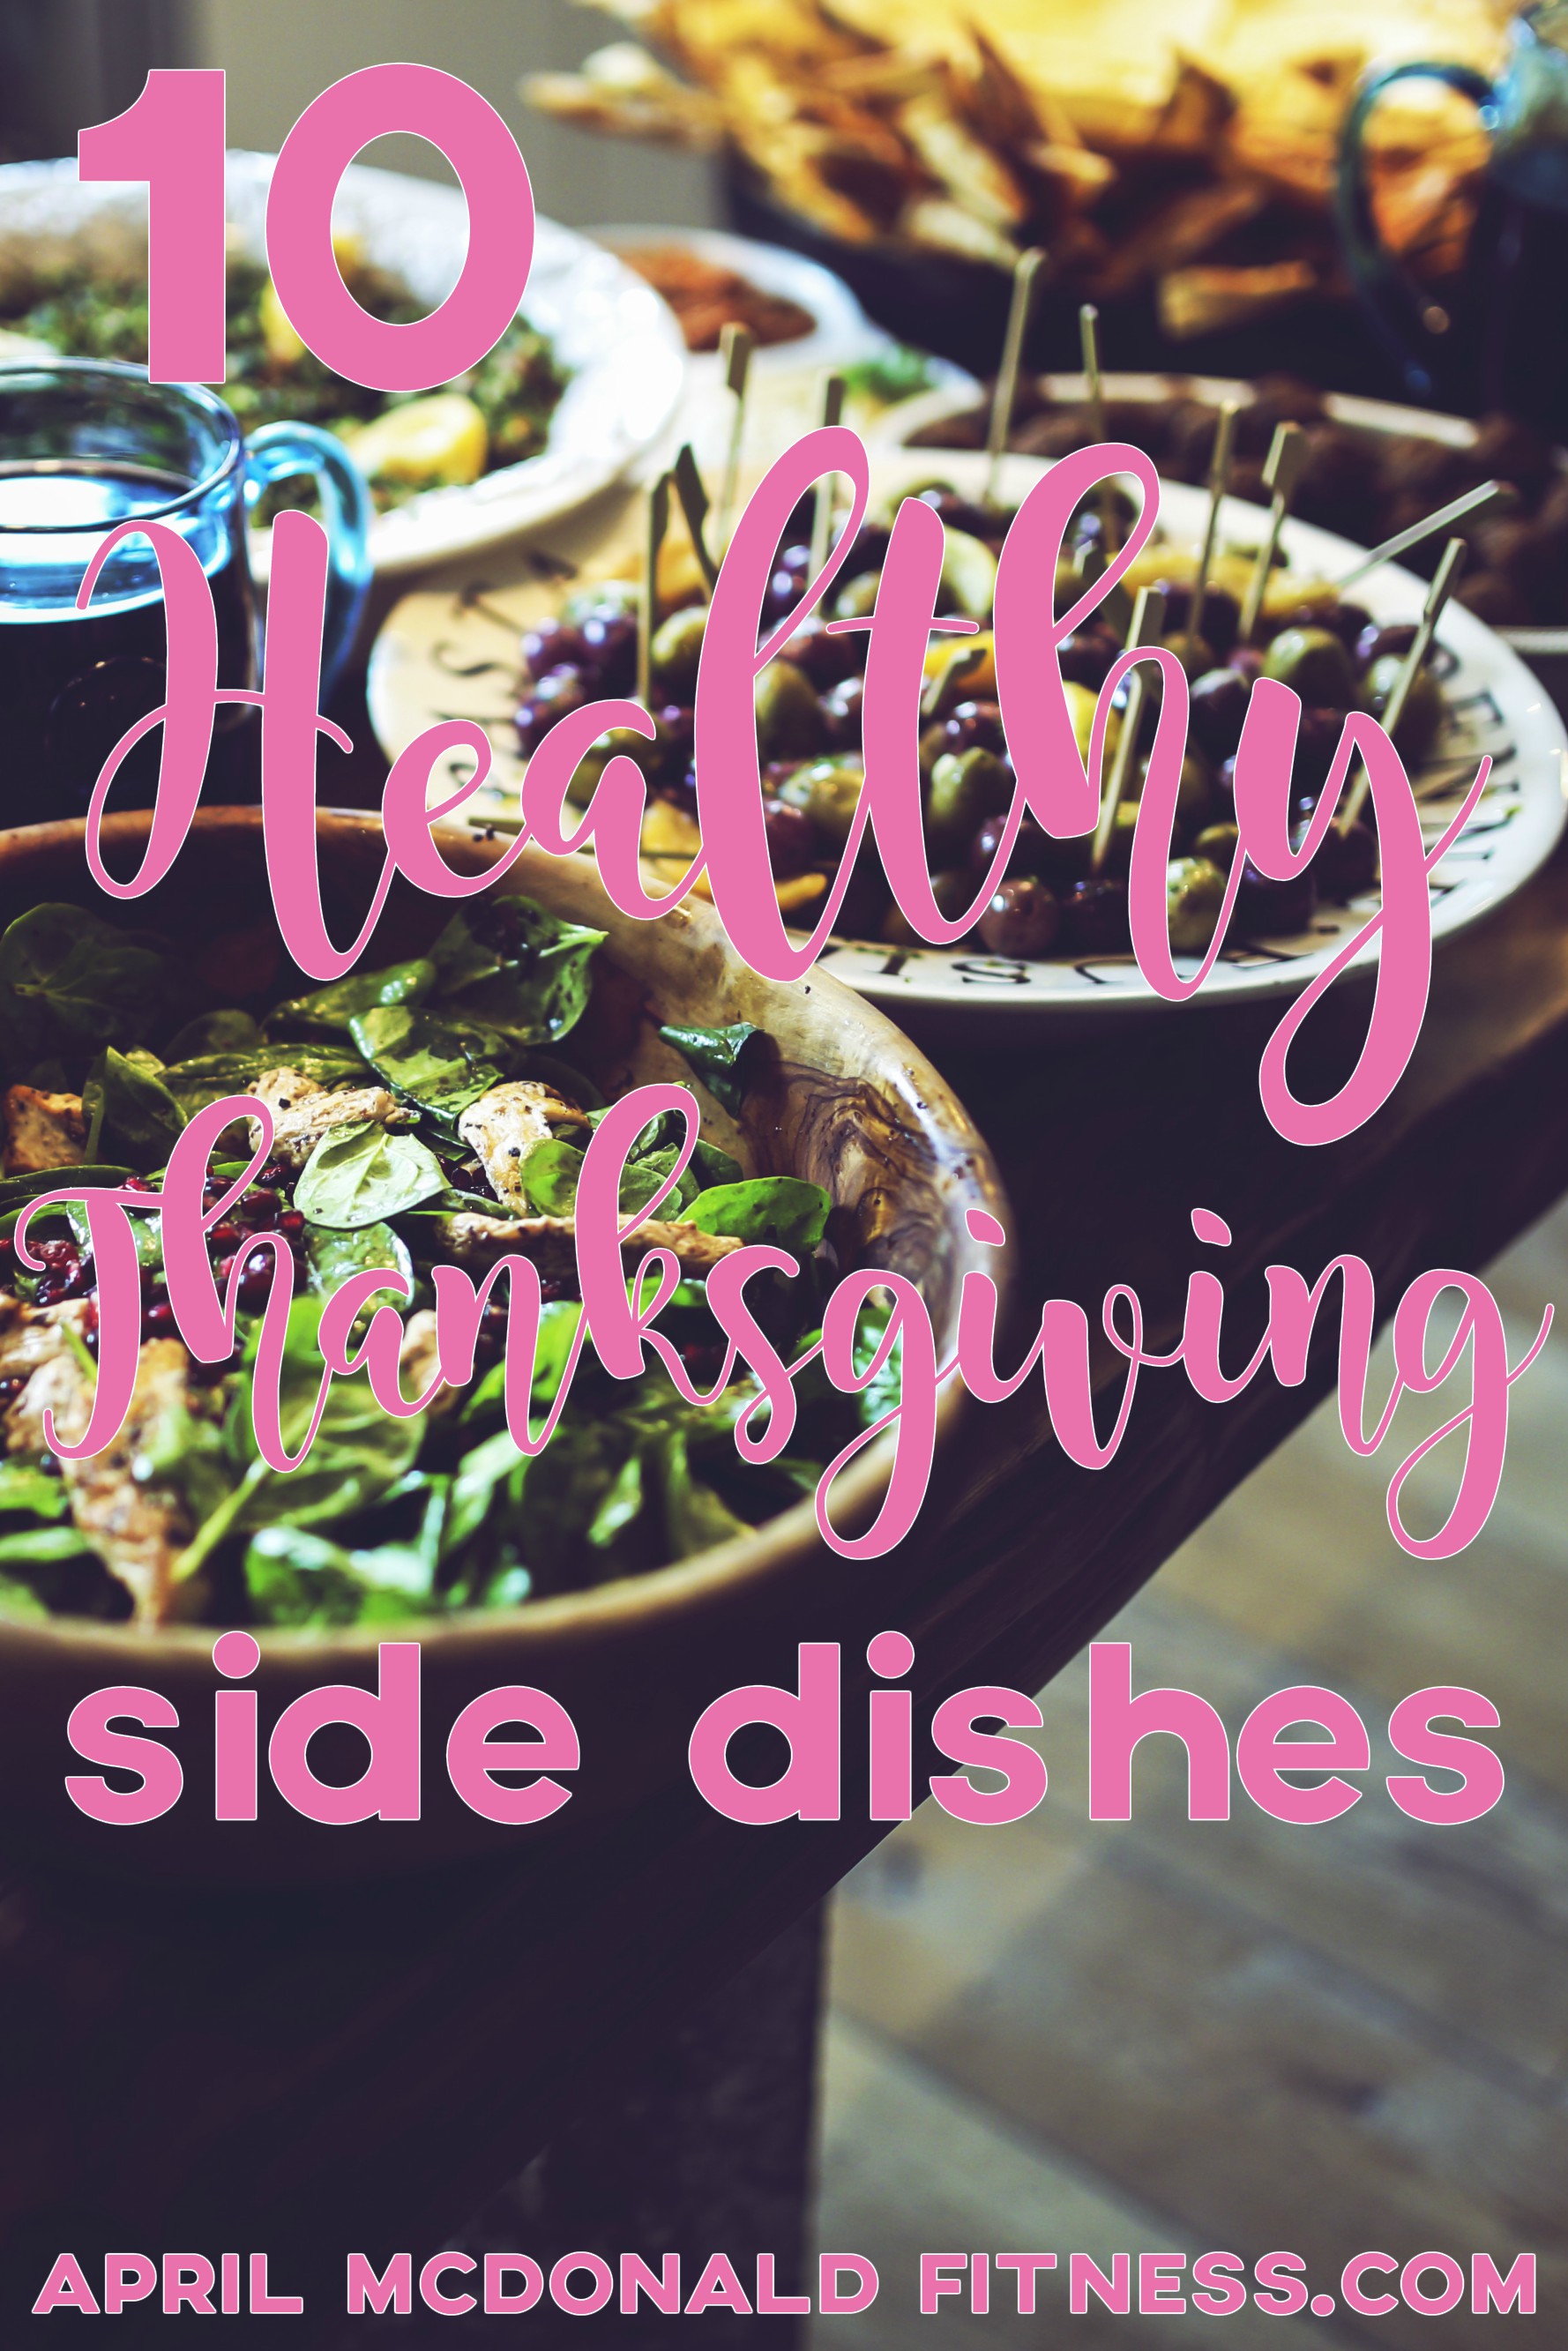 Thanksgiving can be healthy and delicious with seasonal ingredients and harvest inspired side dishes!